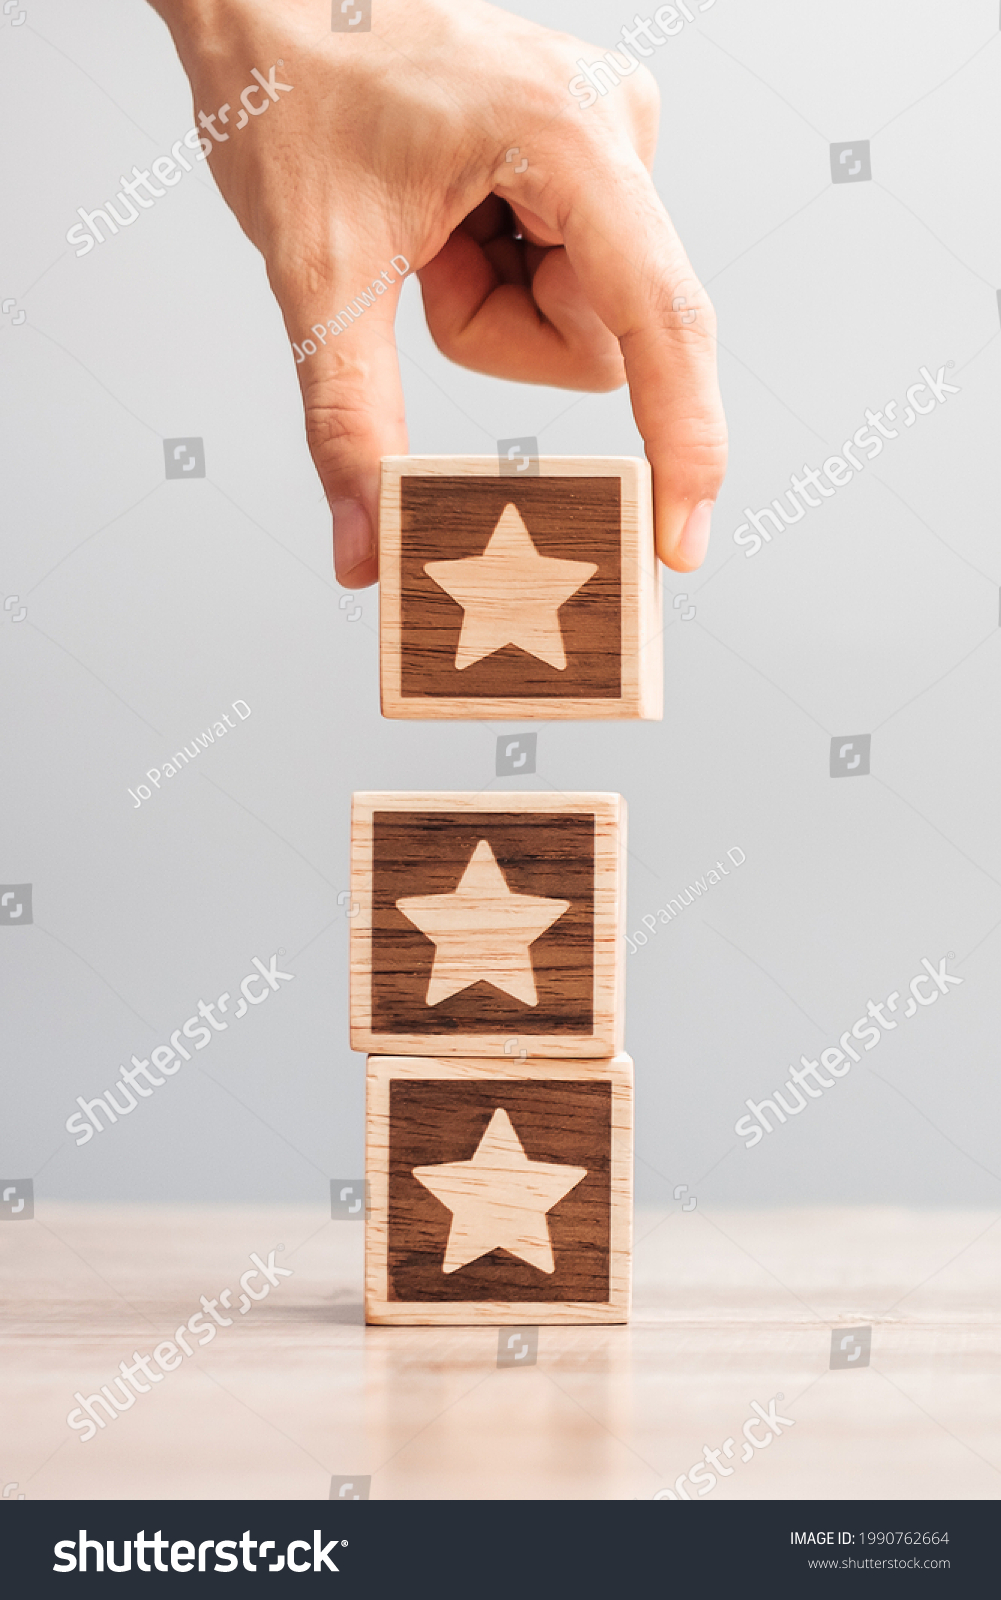 Man hand holding Star block. Customer choose rating for user reviews. Service rating, ranking, customer review, satisfaction, evaluation and feedback concept #1990762664